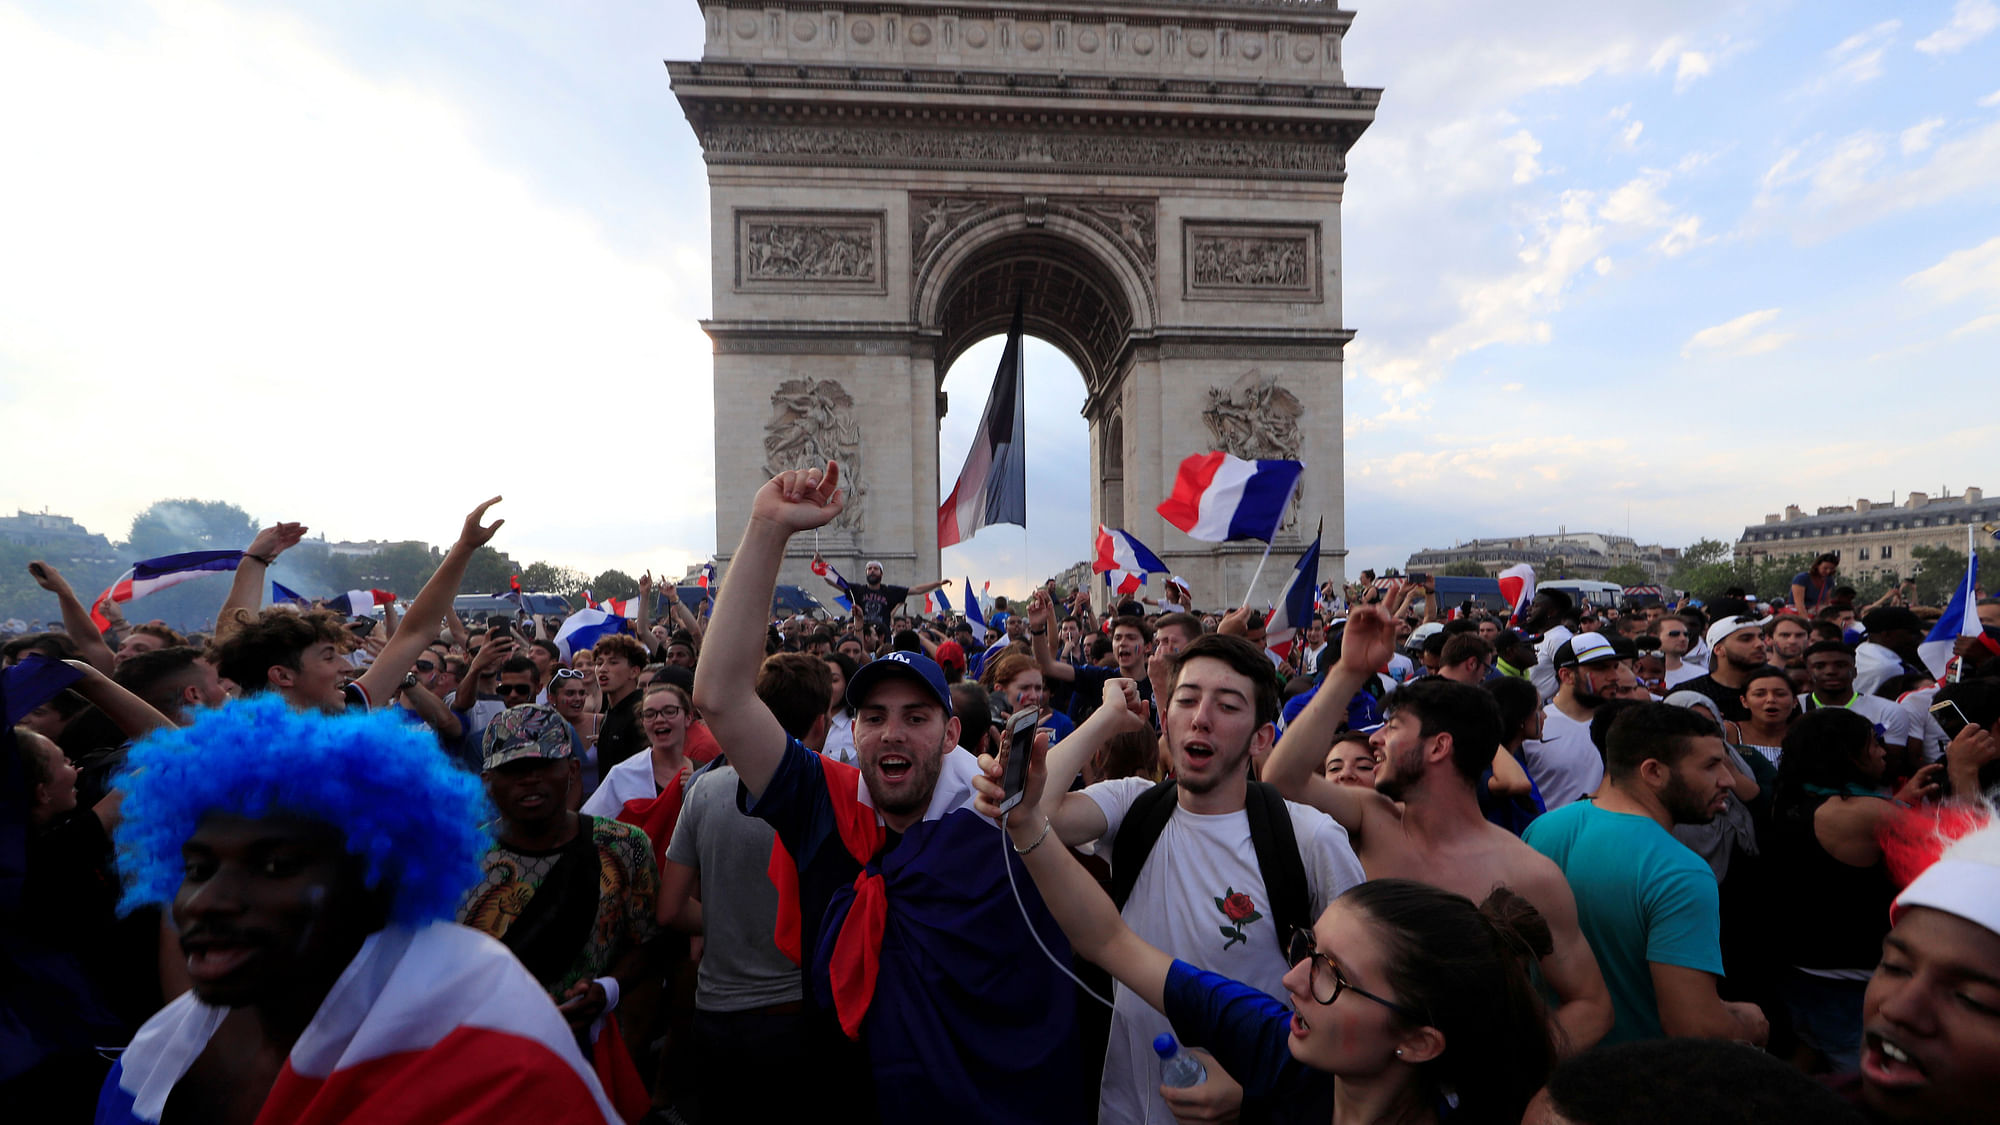 French fans celebrate on the Champs-Elysees avenue near the Arc de Triomphe after France defeated Croatia in the FIFA World Cup final on Sunday.